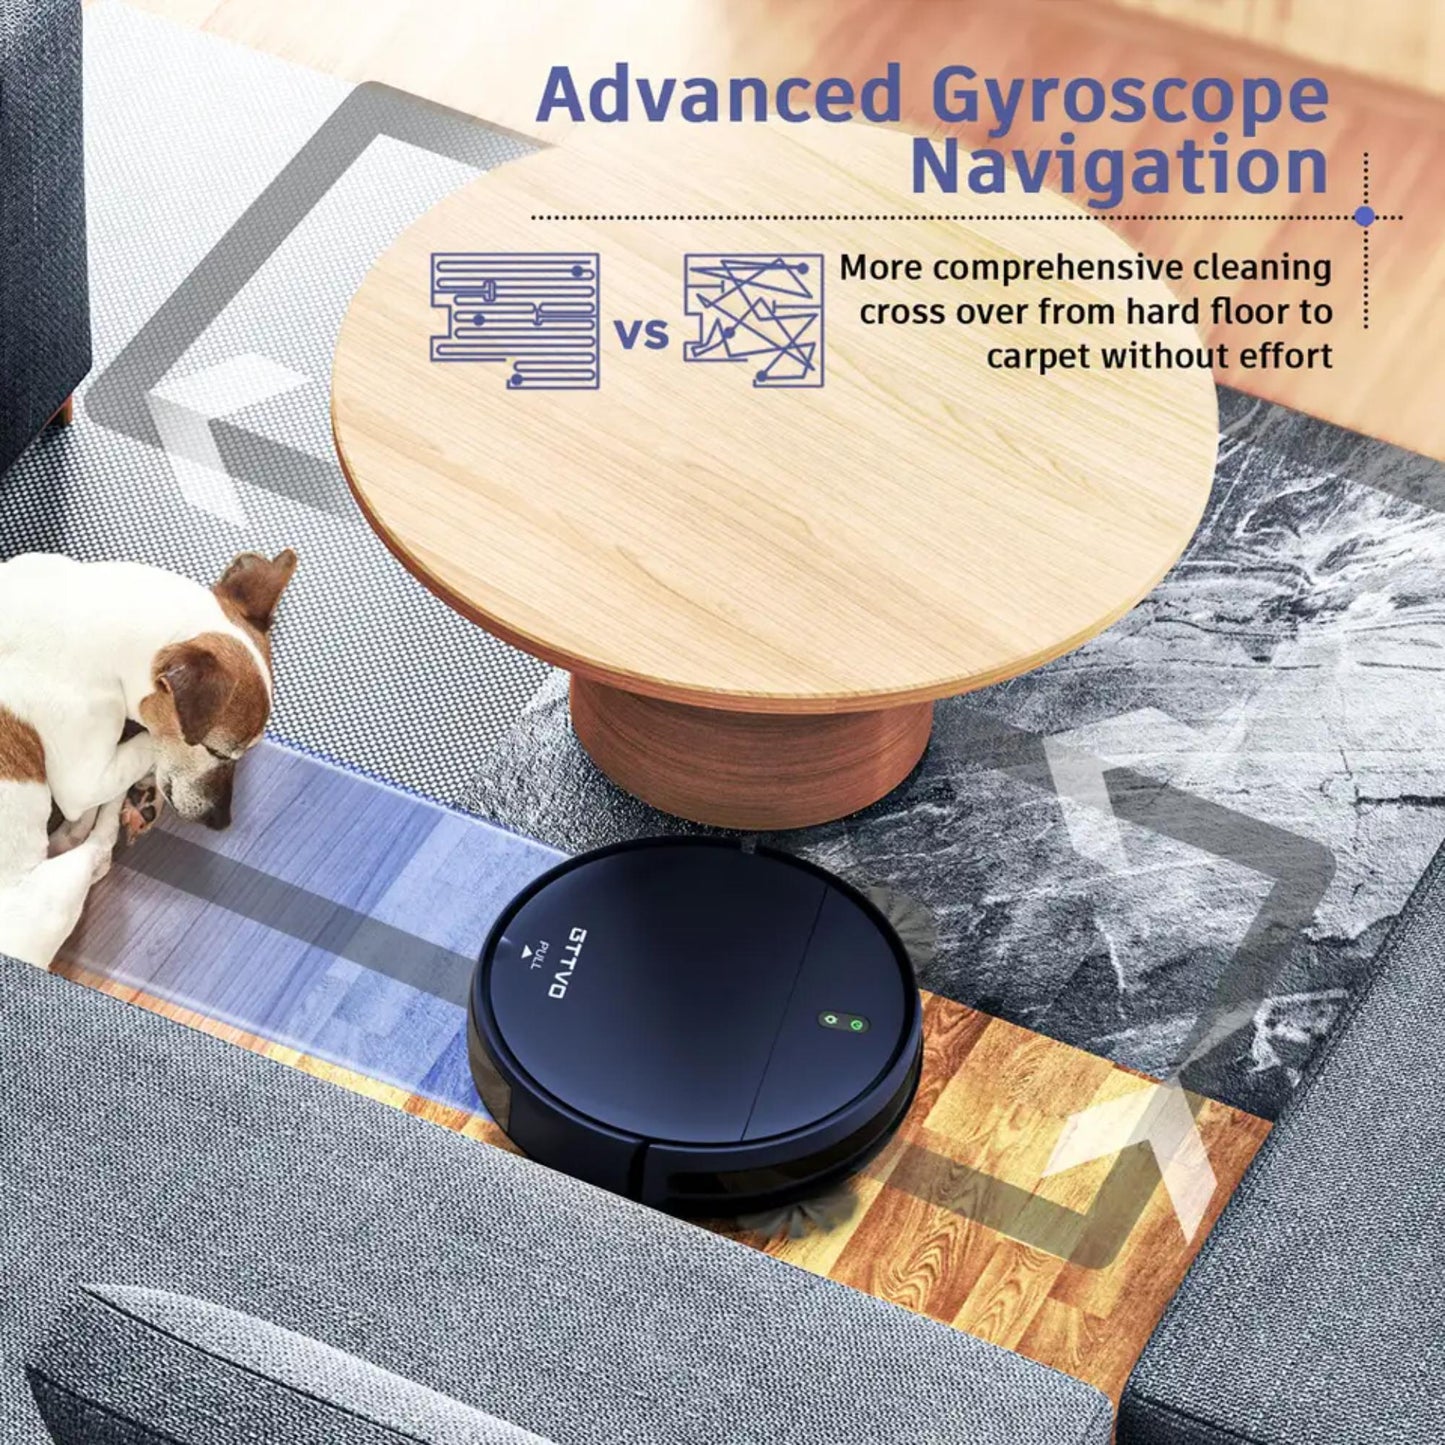 ONSON BR151 Robot Vacuum Cleaner with advanced Gyroscope Navigation. | Blue Chilli Electronics.